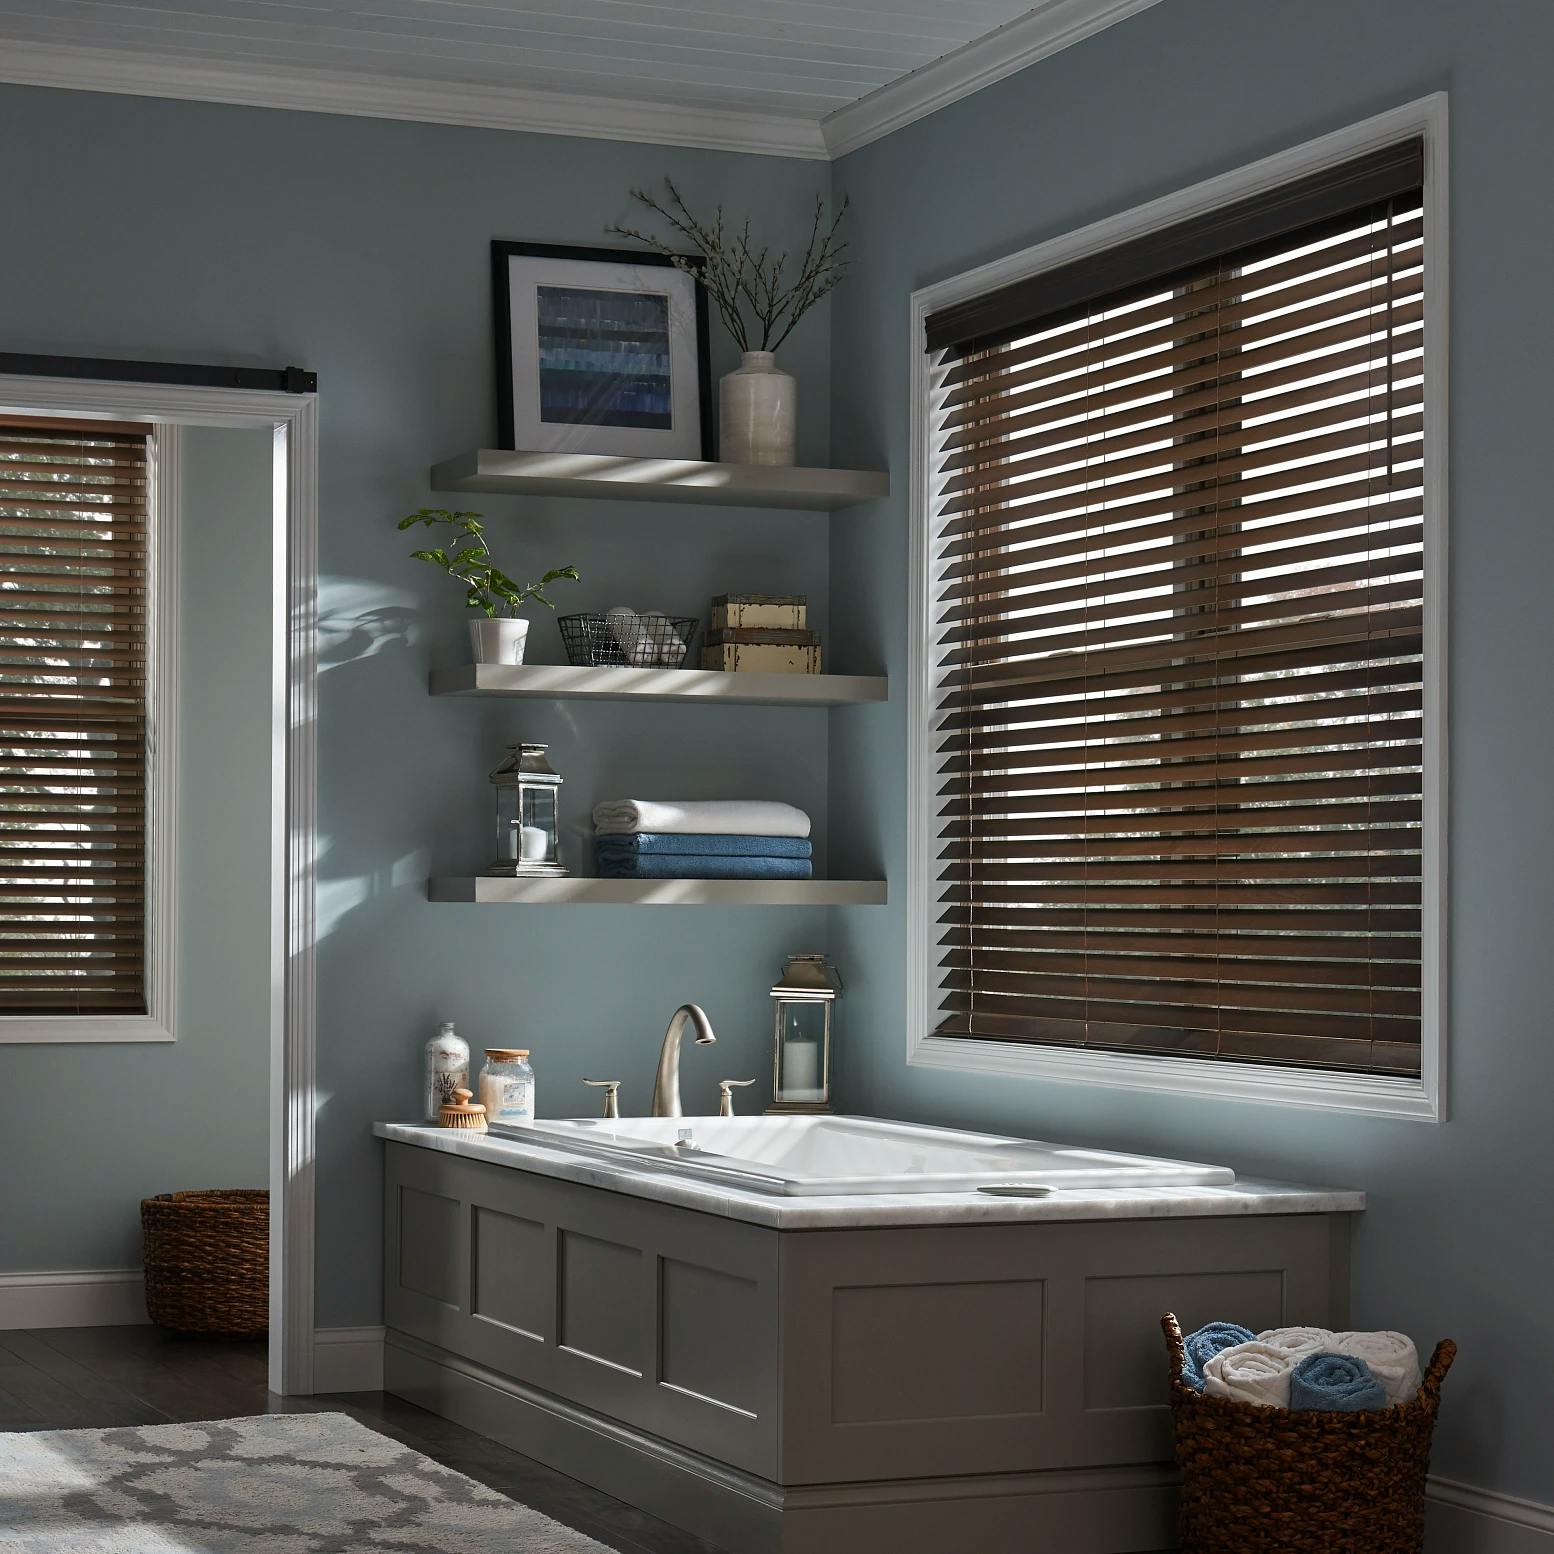 Wood blinds featured in a modern bathroom.